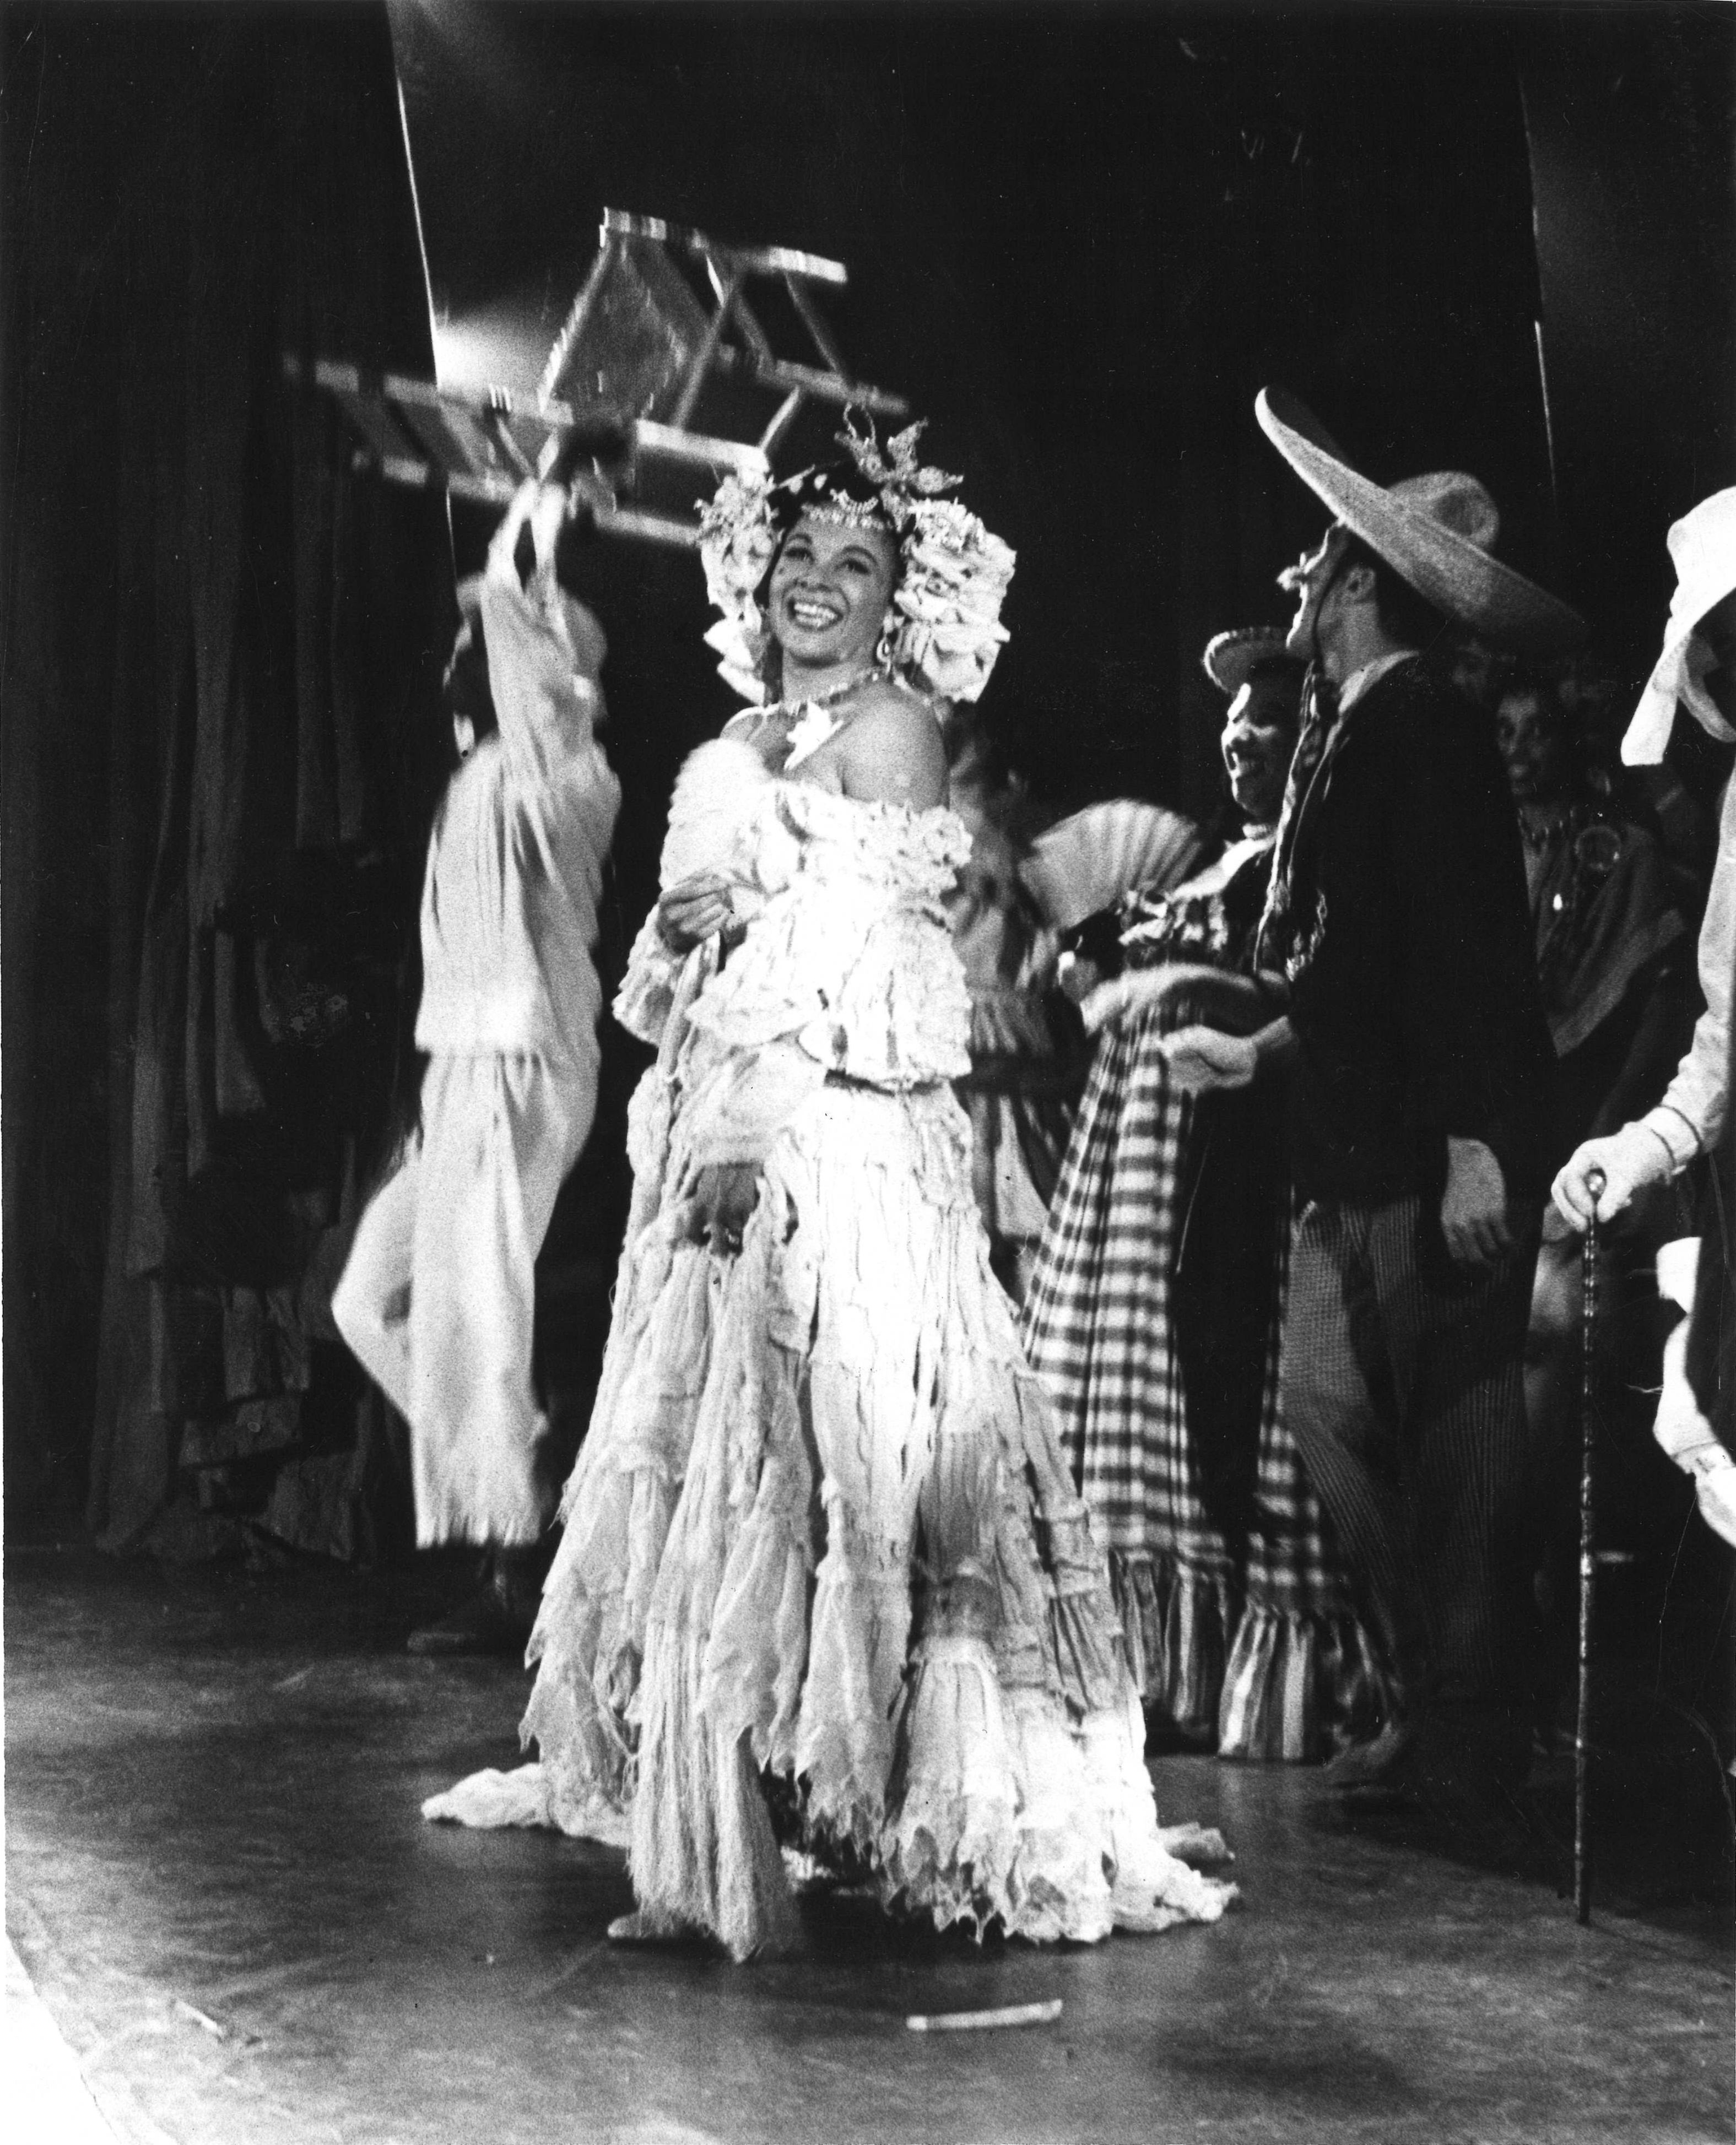 Katherina Dunham is captured onstage, mid-laugh, wearing an intricately draped off-the-shoulder dress and headdress. Other dancers are visible behind her, one of whom marches forward with a chair raised overhead.